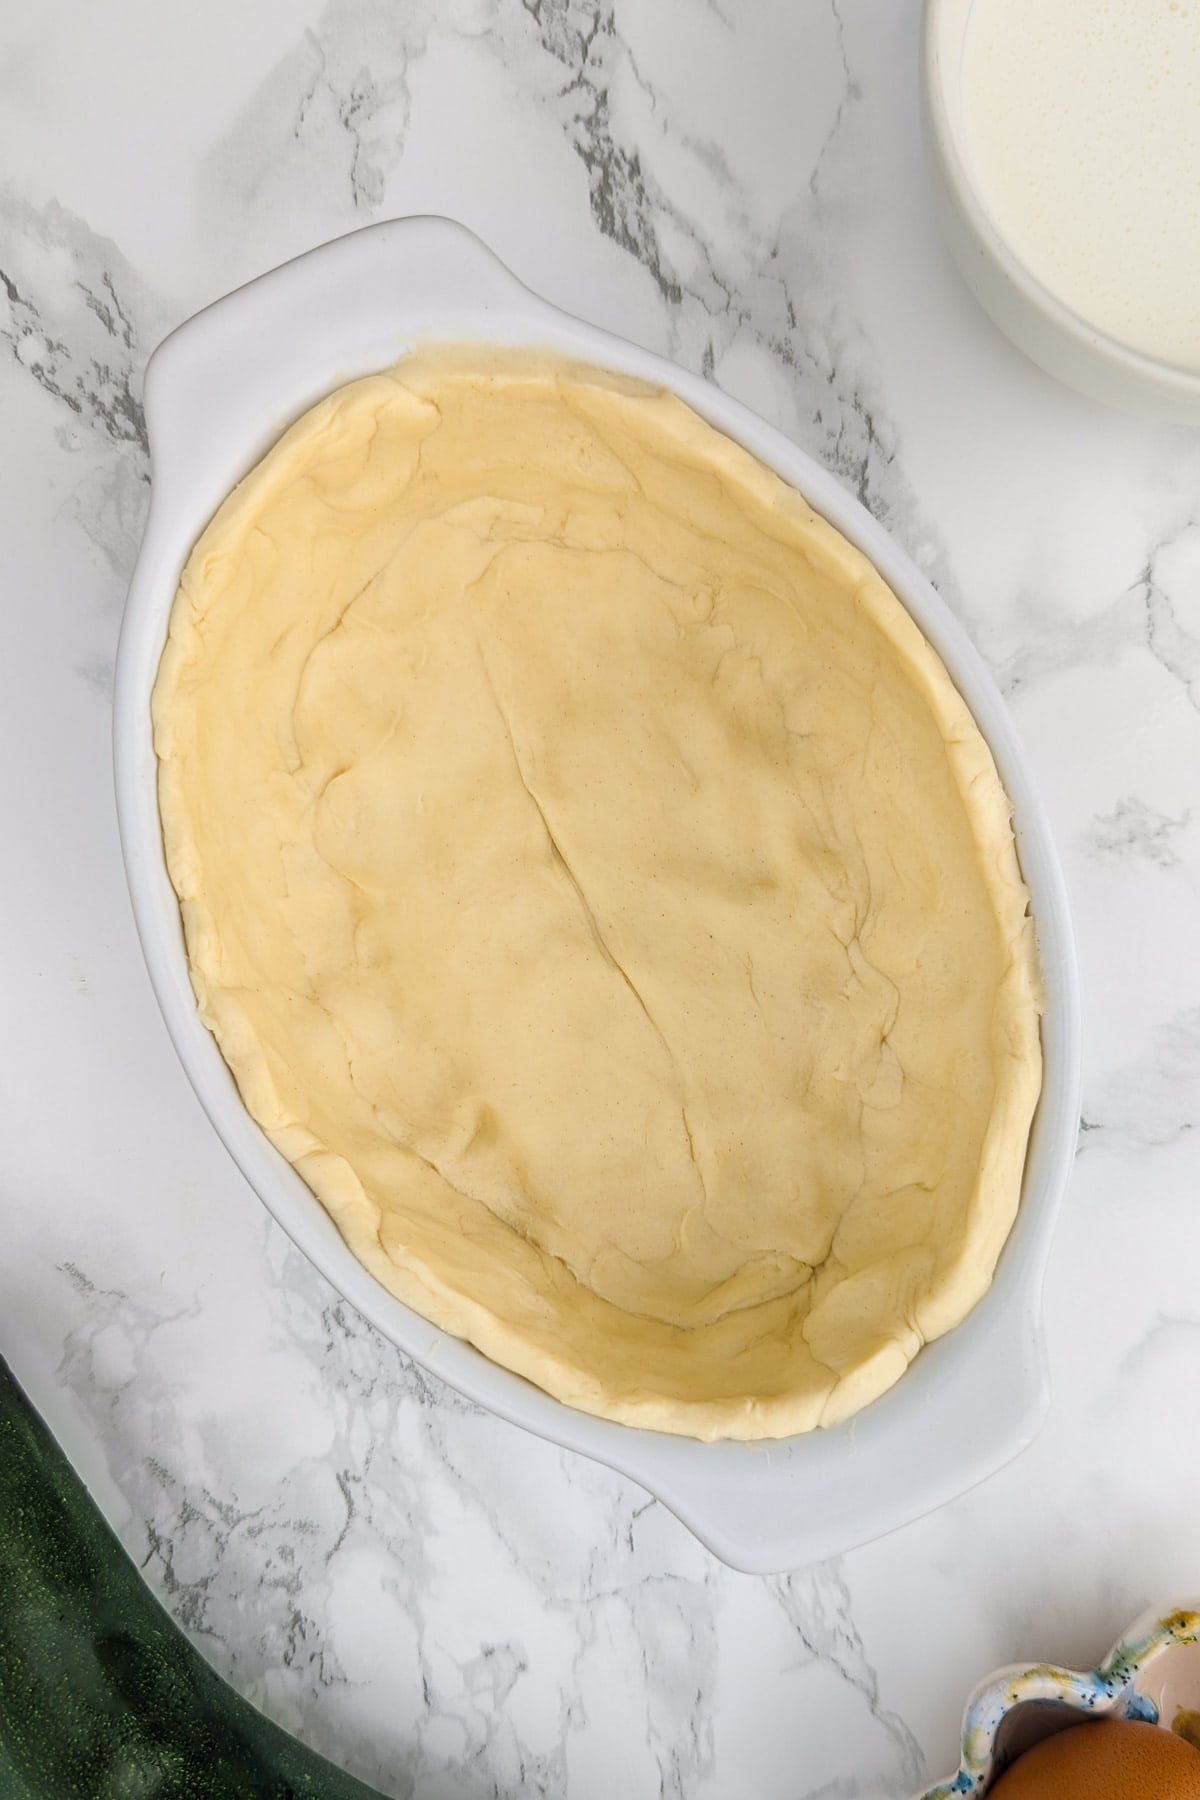 Top view of a baking pan covered with a thin layer of dough.